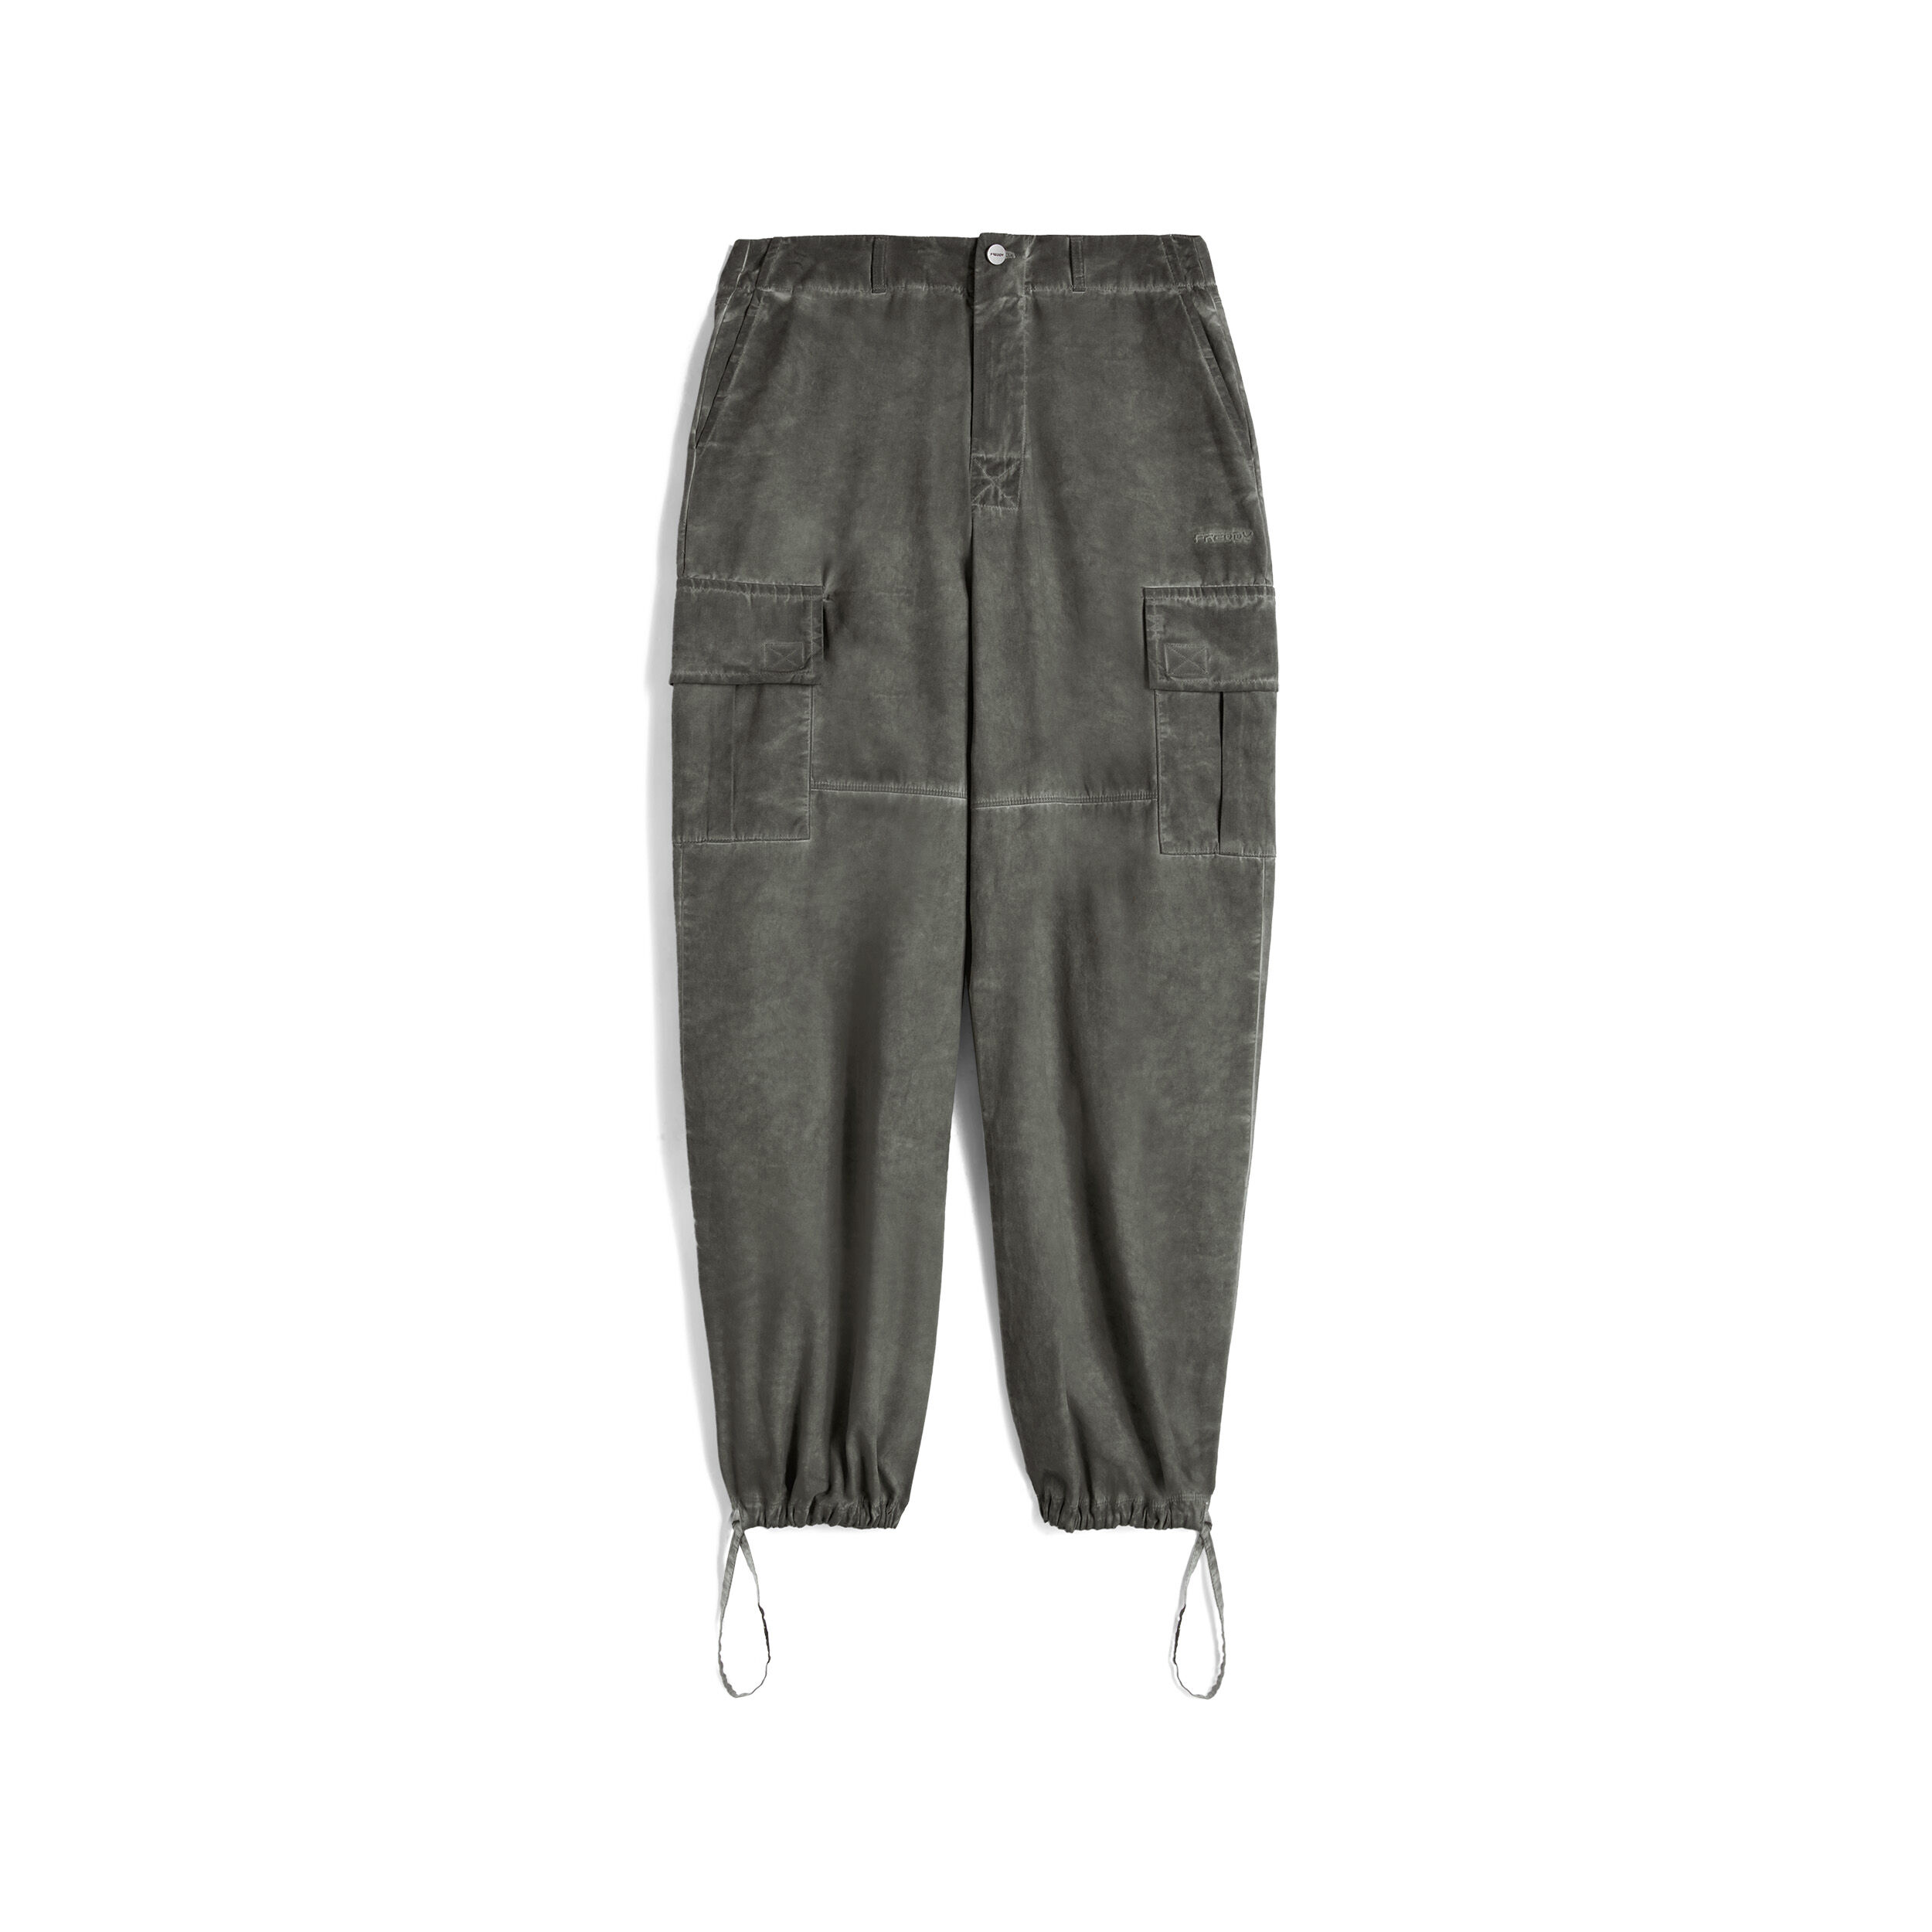 Freddy Pantaloni cargo in canvas tinto capo cold dyed Gray Asphalt Cold Died Donna Xxs